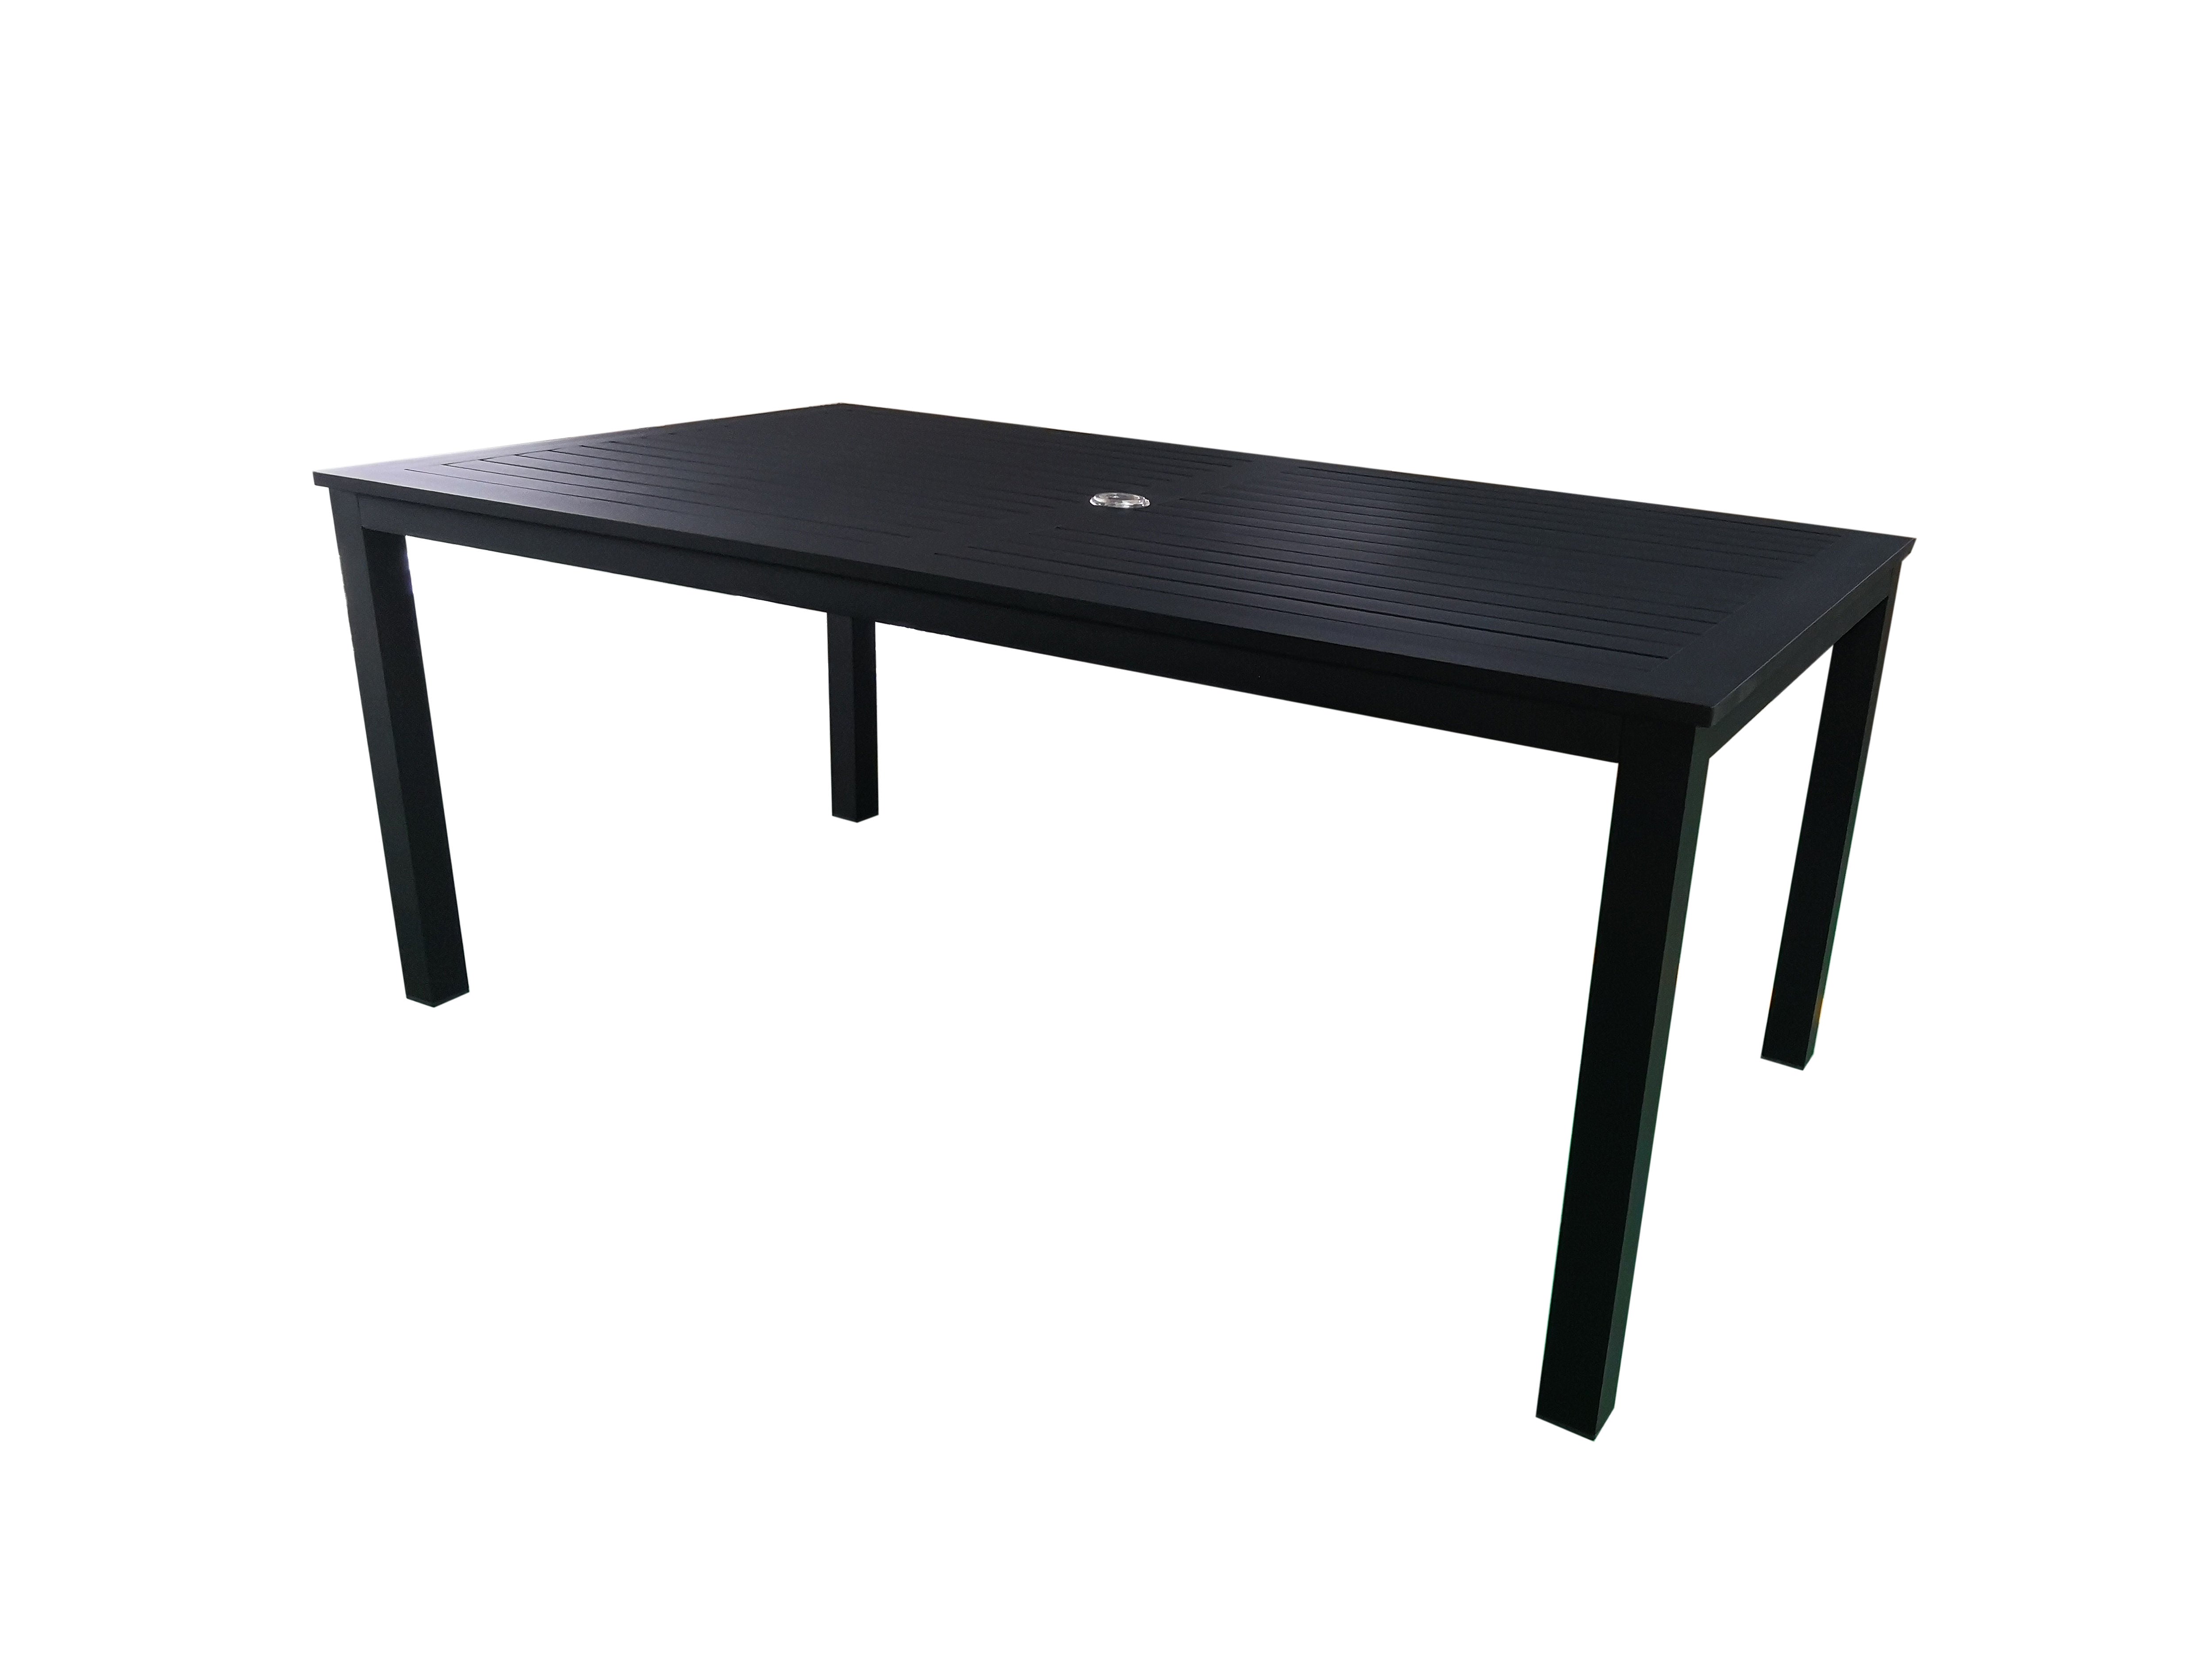 PatioZone Dining Table with Slated Tabletop w/Umbrella Hole in Middle and Aluminum Frame (MOSS-T297N) - Matte Black